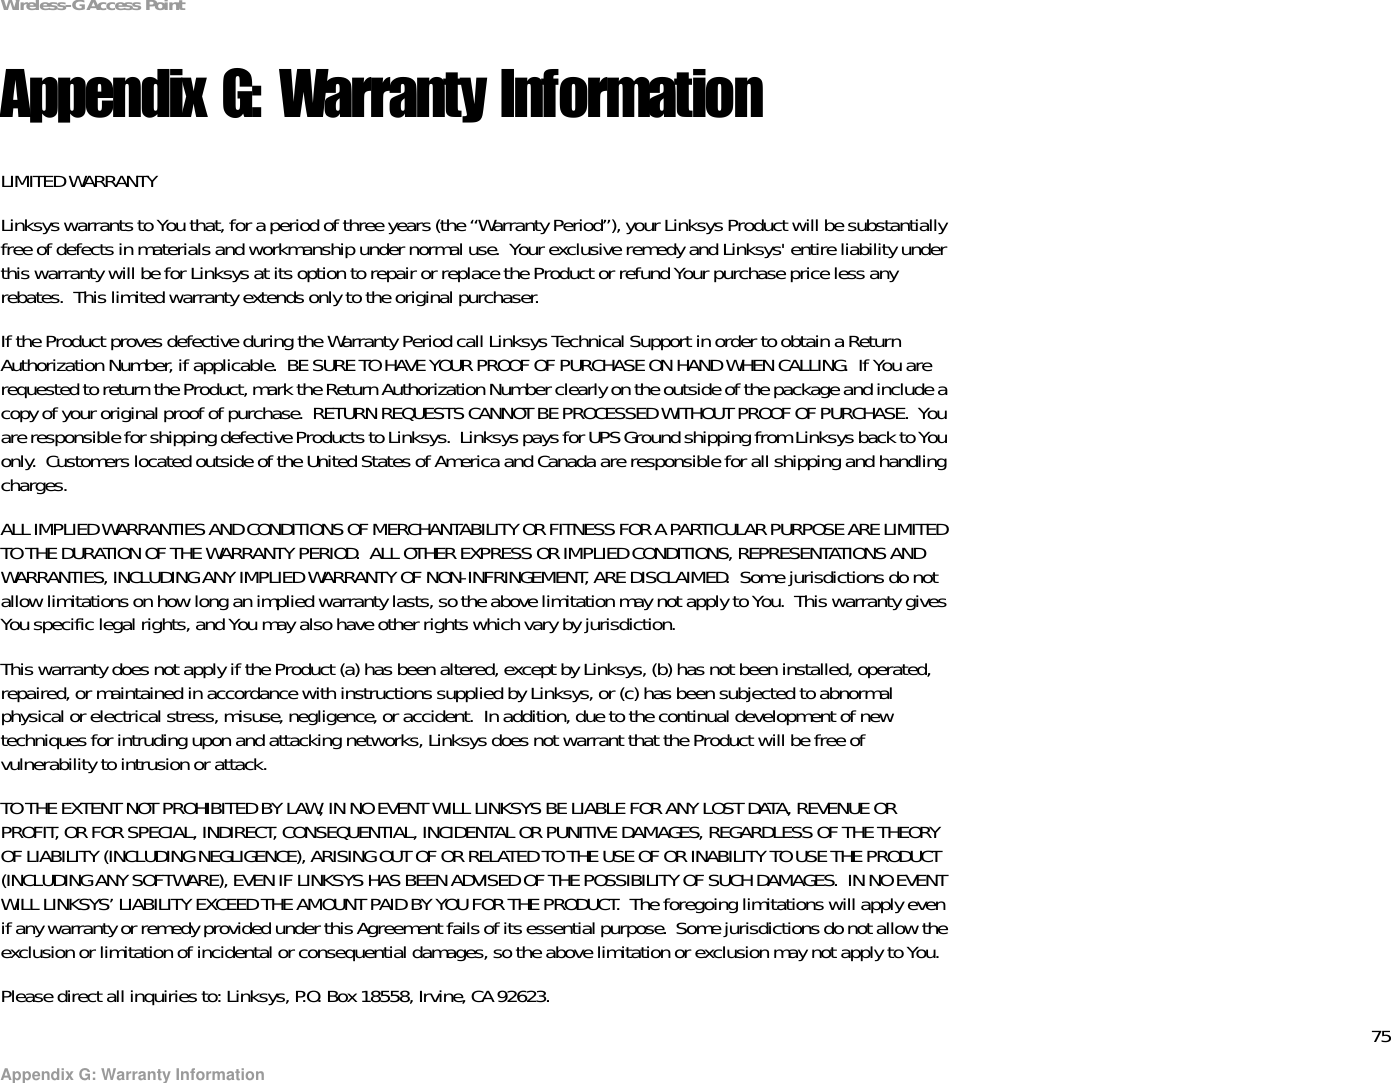 75Appendix G: Warranty InformationWireless-G Access PointAppendix G: Warranty InformationLIMITED WARRANTYLinksys warrants to You that, for a period of three years (the “Warranty Period”), your Linksys Product will be substantially free of defects in materials and workmanship under normal use.  Your exclusive remedy and Linksys&apos; entire liability under this warranty will be for Linksys at its option to repair or replace the Product or refund Your purchase price less any rebates.  This limited warranty extends only to the original purchaser.  If the Product proves defective during the Warranty Period call Linksys Technical Support in order to obtain a Return Authorization Number, if applicable.  BE SURE TO HAVE YOUR PROOF OF PURCHASE ON HAND WHEN CALLING.  If You are requested to return the Product, mark the Return Authorization Number clearly on the outside of the package and include a copy of your original proof of purchase.  RETURN REQUESTS CANNOT BE PROCESSED WITHOUT PROOF OF PURCHASE.  You are responsible for shipping defective Products to Linksys.  Linksys pays for UPS Ground shipping from Linksys back to You only.  Customers located outside of the United States of America and Canada are responsible for all shipping and handling charges. ALL IMPLIED WARRANTIES AND CONDITIONS OF MERCHANTABILITY OR FITNESS FOR A PARTICULAR PURPOSE ARE LIMITED TO THE DURATION OF THE WARRANTY PERIOD.  ALL OTHER EXPRESS OR IMPLIED CONDITIONS, REPRESENTATIONS AND WARRANTIES, INCLUDING ANY IMPLIED WARRANTY OF NON-INFRINGEMENT, ARE DISCLAIMED.  Some jurisdictions do not allow limitations on how long an implied warranty lasts, so the above limitation may not apply to You.  This warranty gives You specific legal rights, and You may also have other rights which vary by jurisdiction.This warranty does not apply if the Product (a) has been altered, except by Linksys, (b) has not been installed, operated, repaired, or maintained in accordance with instructions supplied by Linksys, or (c) has been subjected to abnormal physical or electrical stress, misuse, negligence, or accident.  In addition, due to the continual development of new techniques for intruding upon and attacking networks, Linksys does not warrant that the Product will be free of vulnerability to intrusion or attack.TO THE EXTENT NOT PROHIBITED BY LAW, IN NO EVENT WILL LINKSYS BE LIABLE FOR ANY LOST DATA, REVENUE OR PROFIT, OR FOR SPECIAL, INDIRECT, CONSEQUENTIAL, INCIDENTAL OR PUNITIVE DAMAGES, REGARDLESS OF THE THEORY OF LIABILITY (INCLUDING NEGLIGENCE), ARISING OUT OF OR RELATED TO THE USE OF OR INABILITY TO USE THE PRODUCT (INCLUDING ANY SOFTWARE), EVEN IF LINKSYS HAS BEEN ADVISED OF THE POSSIBILITY OF SUCH DAMAGES.  IN NO EVENT WILL LINKSYS’ LIABILITY EXCEED THE AMOUNT PAID BY YOU FOR THE PRODUCT.  The foregoing limitations will apply even if any warranty or remedy provided under this Agreement fails of its essential purpose.  Some jurisdictions do not allow the exclusion or limitation of incidental or consequential damages, so the above limitation or exclusion may not apply to You.Please direct all inquiries to: Linksys, P.O. Box 18558, Irvine, CA 92623.